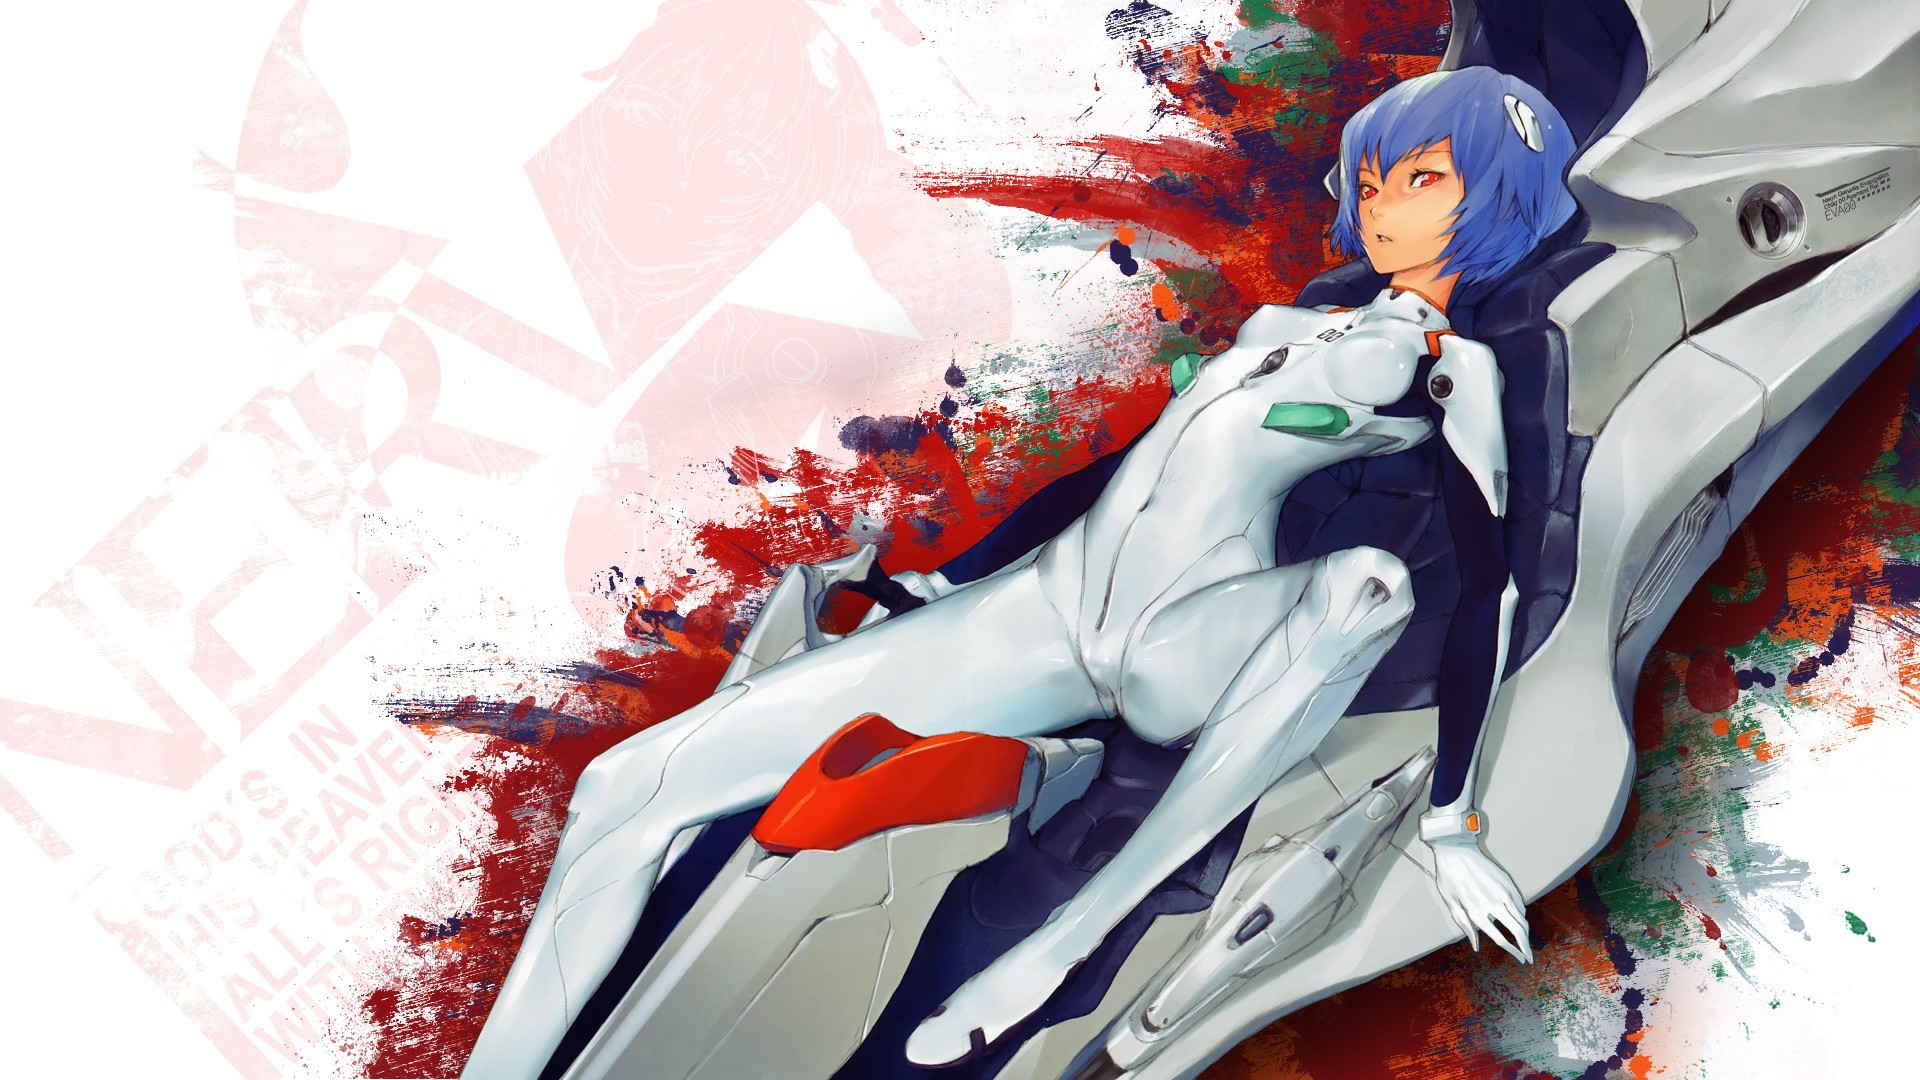 Free Download Evangelion Wallpapers Latest Hq Backgrounds Hd Wallpapers Gallery 19x1080 For Your Desktop Mobile Tablet Explore 48 Evangelion Hd Wallpapers Evangelion Phone Wallpaper Evangelion Nerv Wallpaper Evangelion Asuka Wallpaper